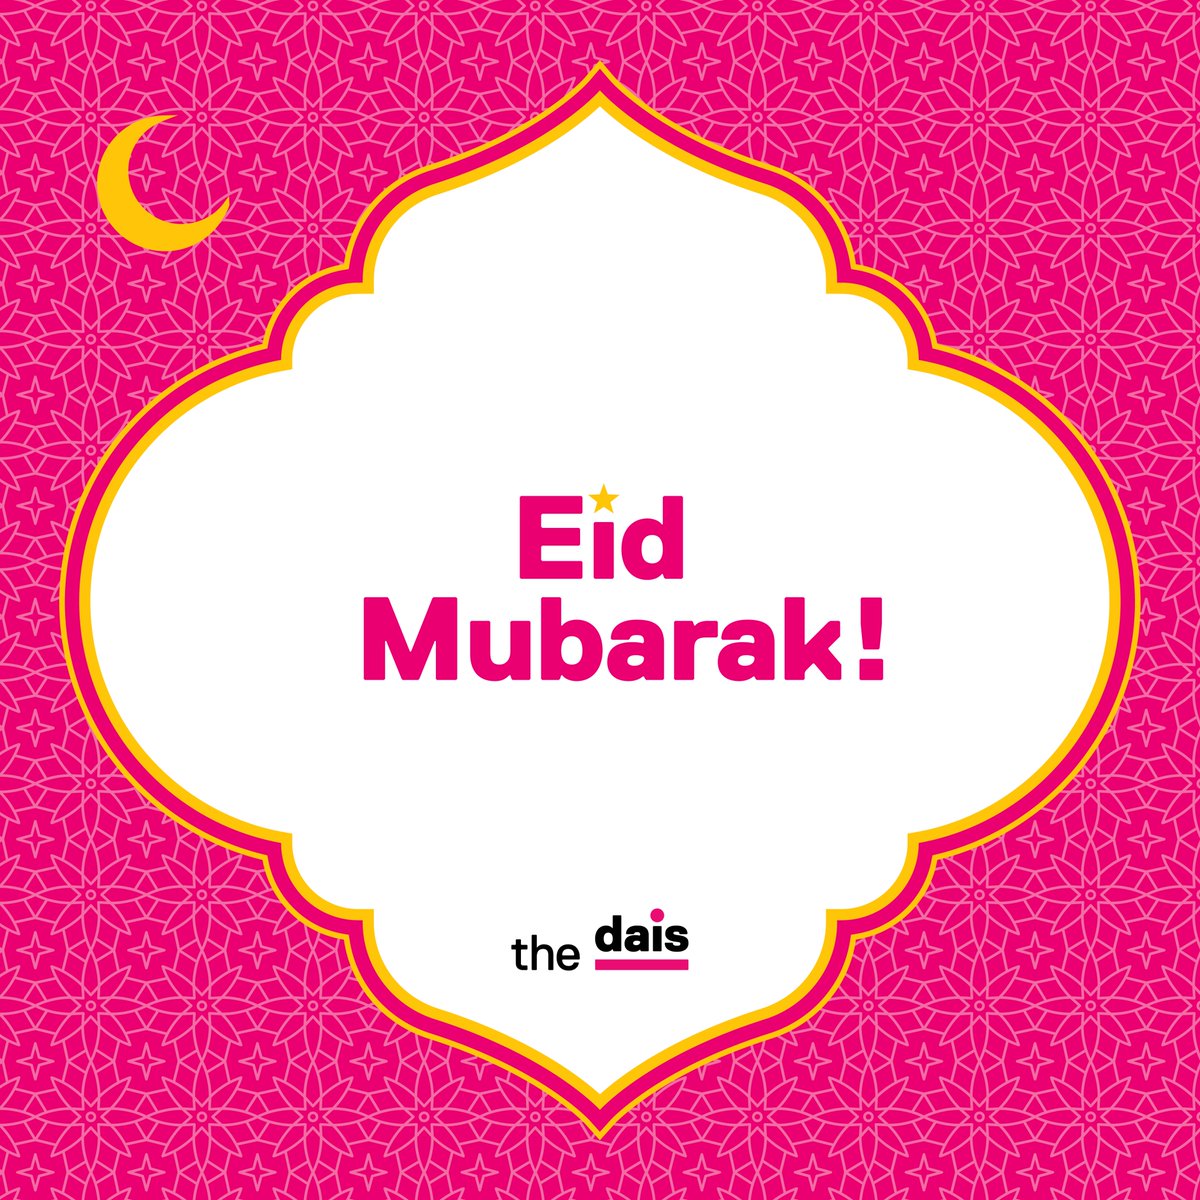 Wishing a joyful day with friends and family to all those celebrating Eid al-Fitr. Eid Mubarak from the Dais!